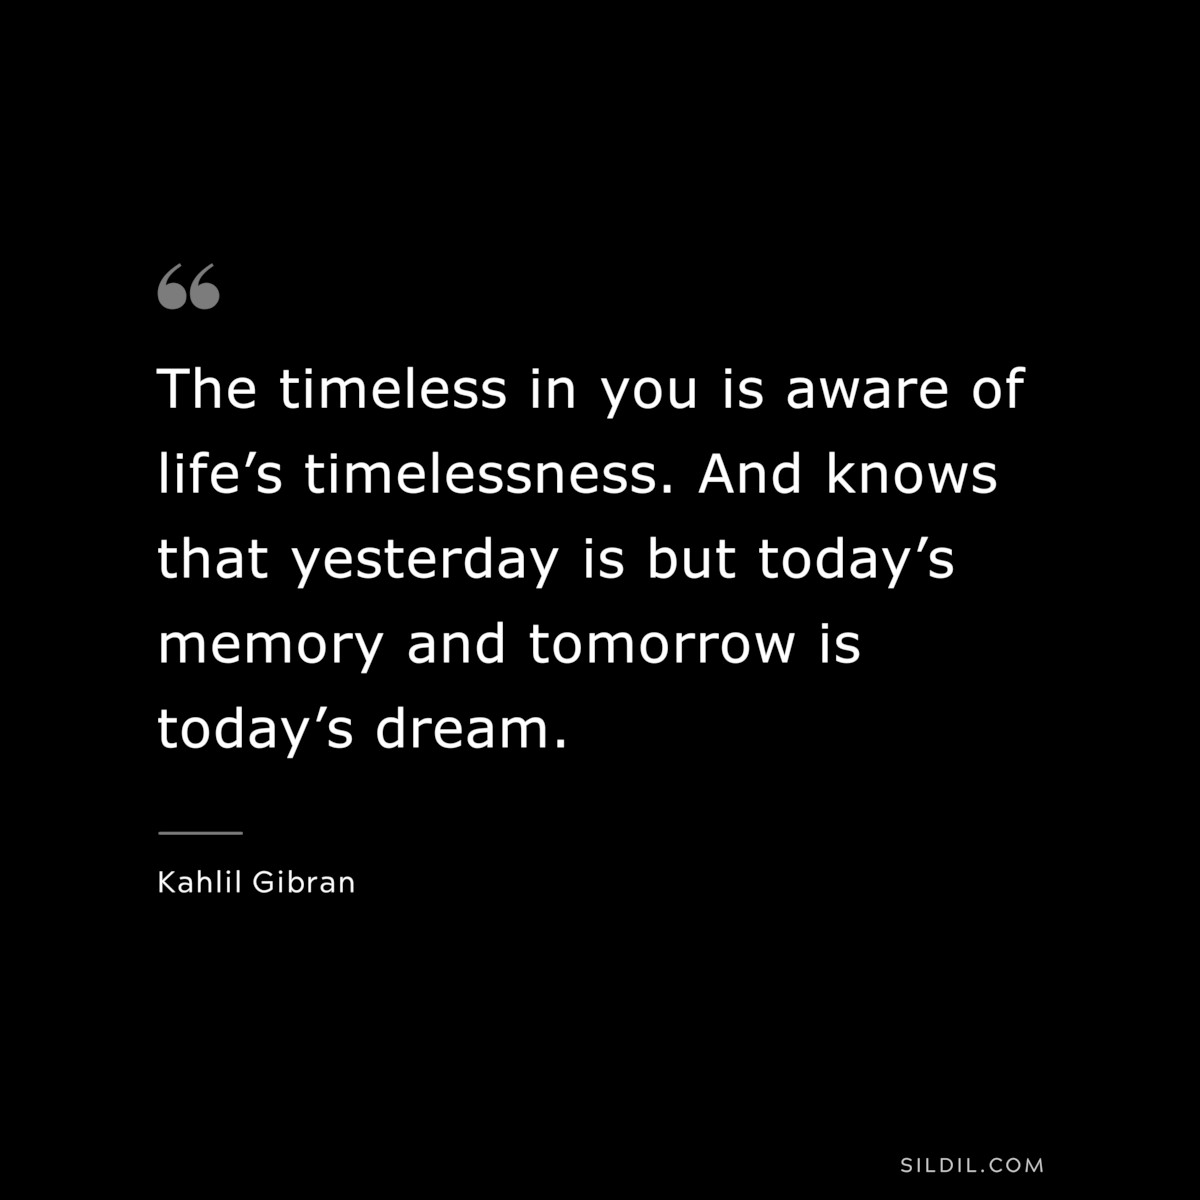 The timeless in you is aware of life’s timelessness. And knows that yesterday is but today’s memory and tomorrow is today’s dream. ― Kahlil Gibran